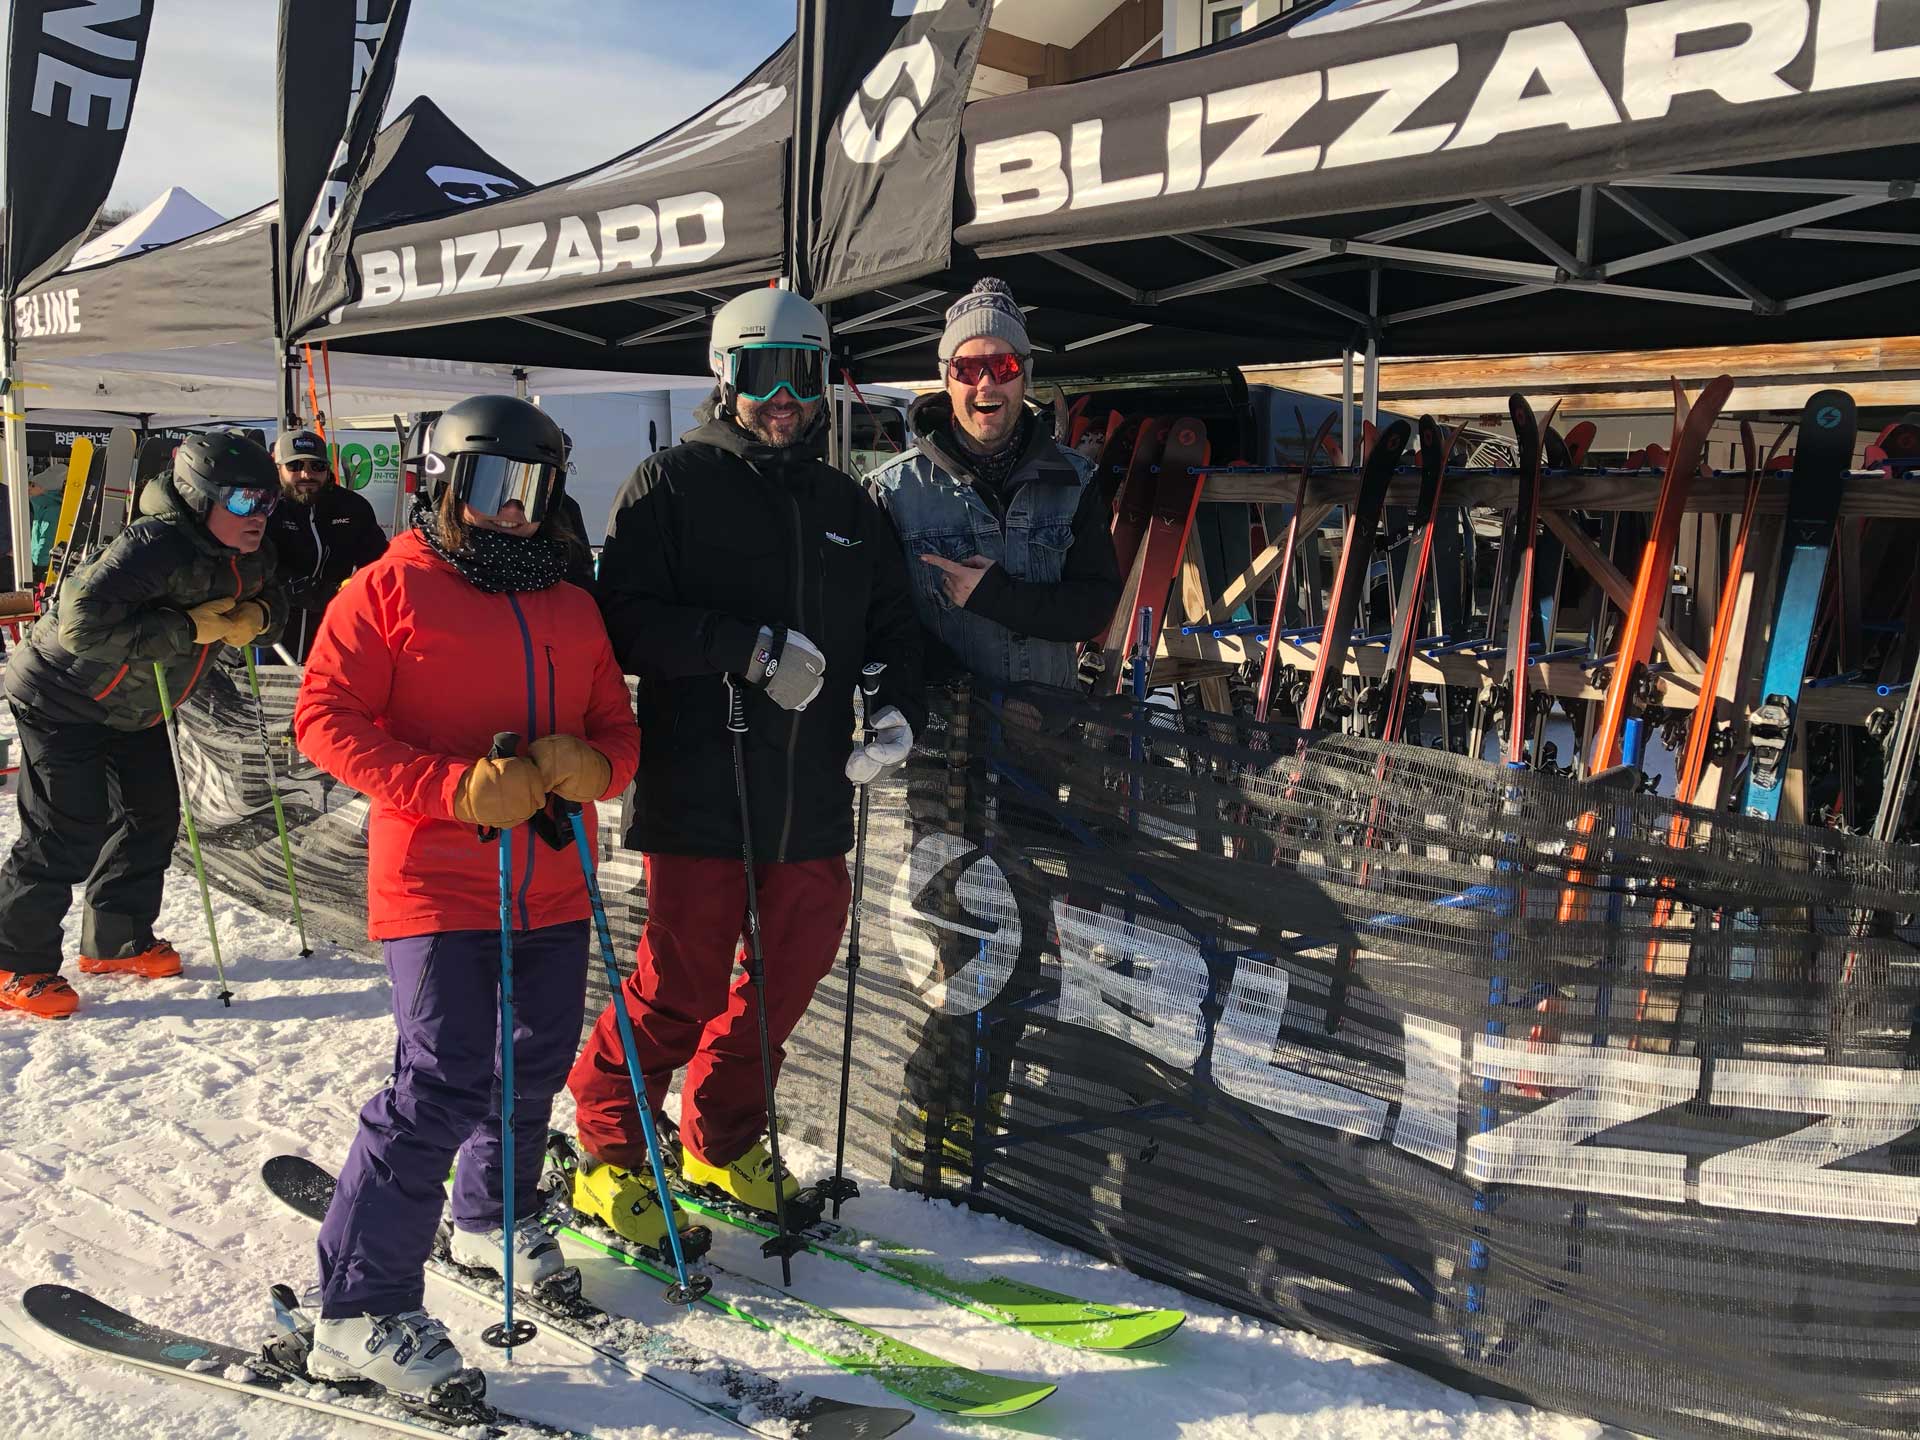 People smiling in front of Blizzard ski gear booth at a snow event